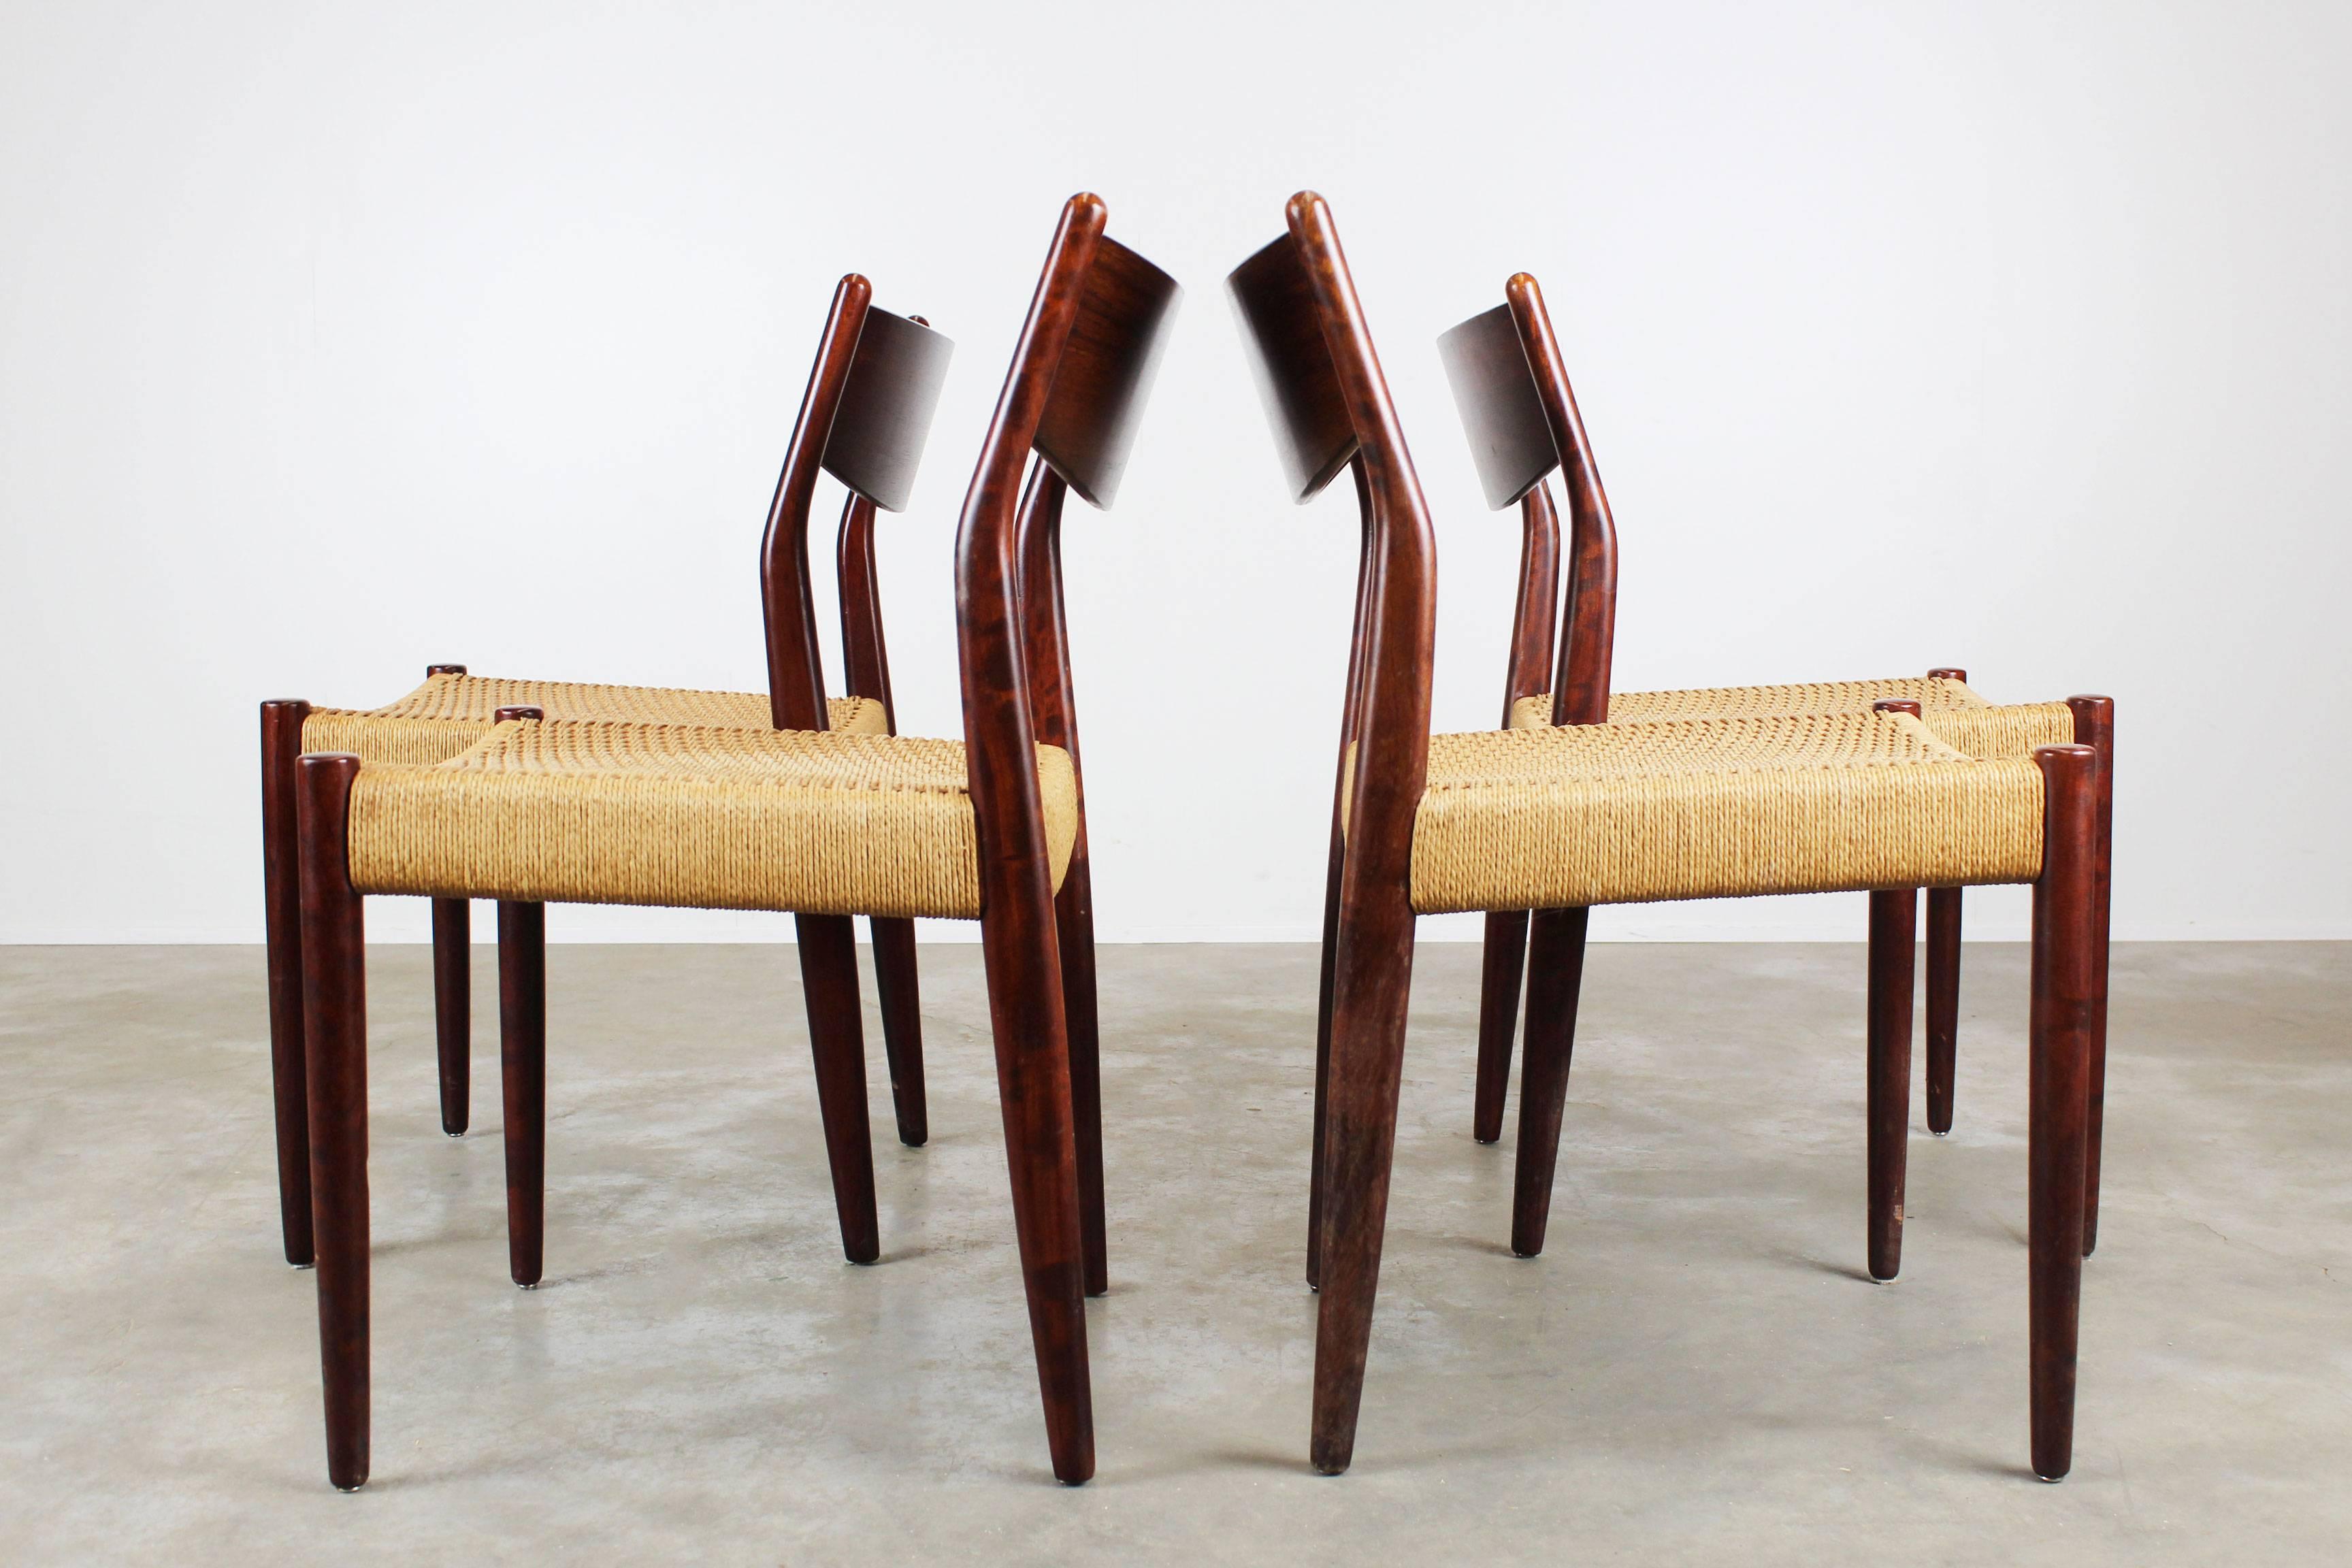 Set of four Dutch design dining chairs produced by Pastoe in 1960s. Heavily inspired by the Danish design styles Pastoe created these wonderful dining chairs with sculpted solid rosewood frame and woven papercord seat. Very comfortable chairs, the